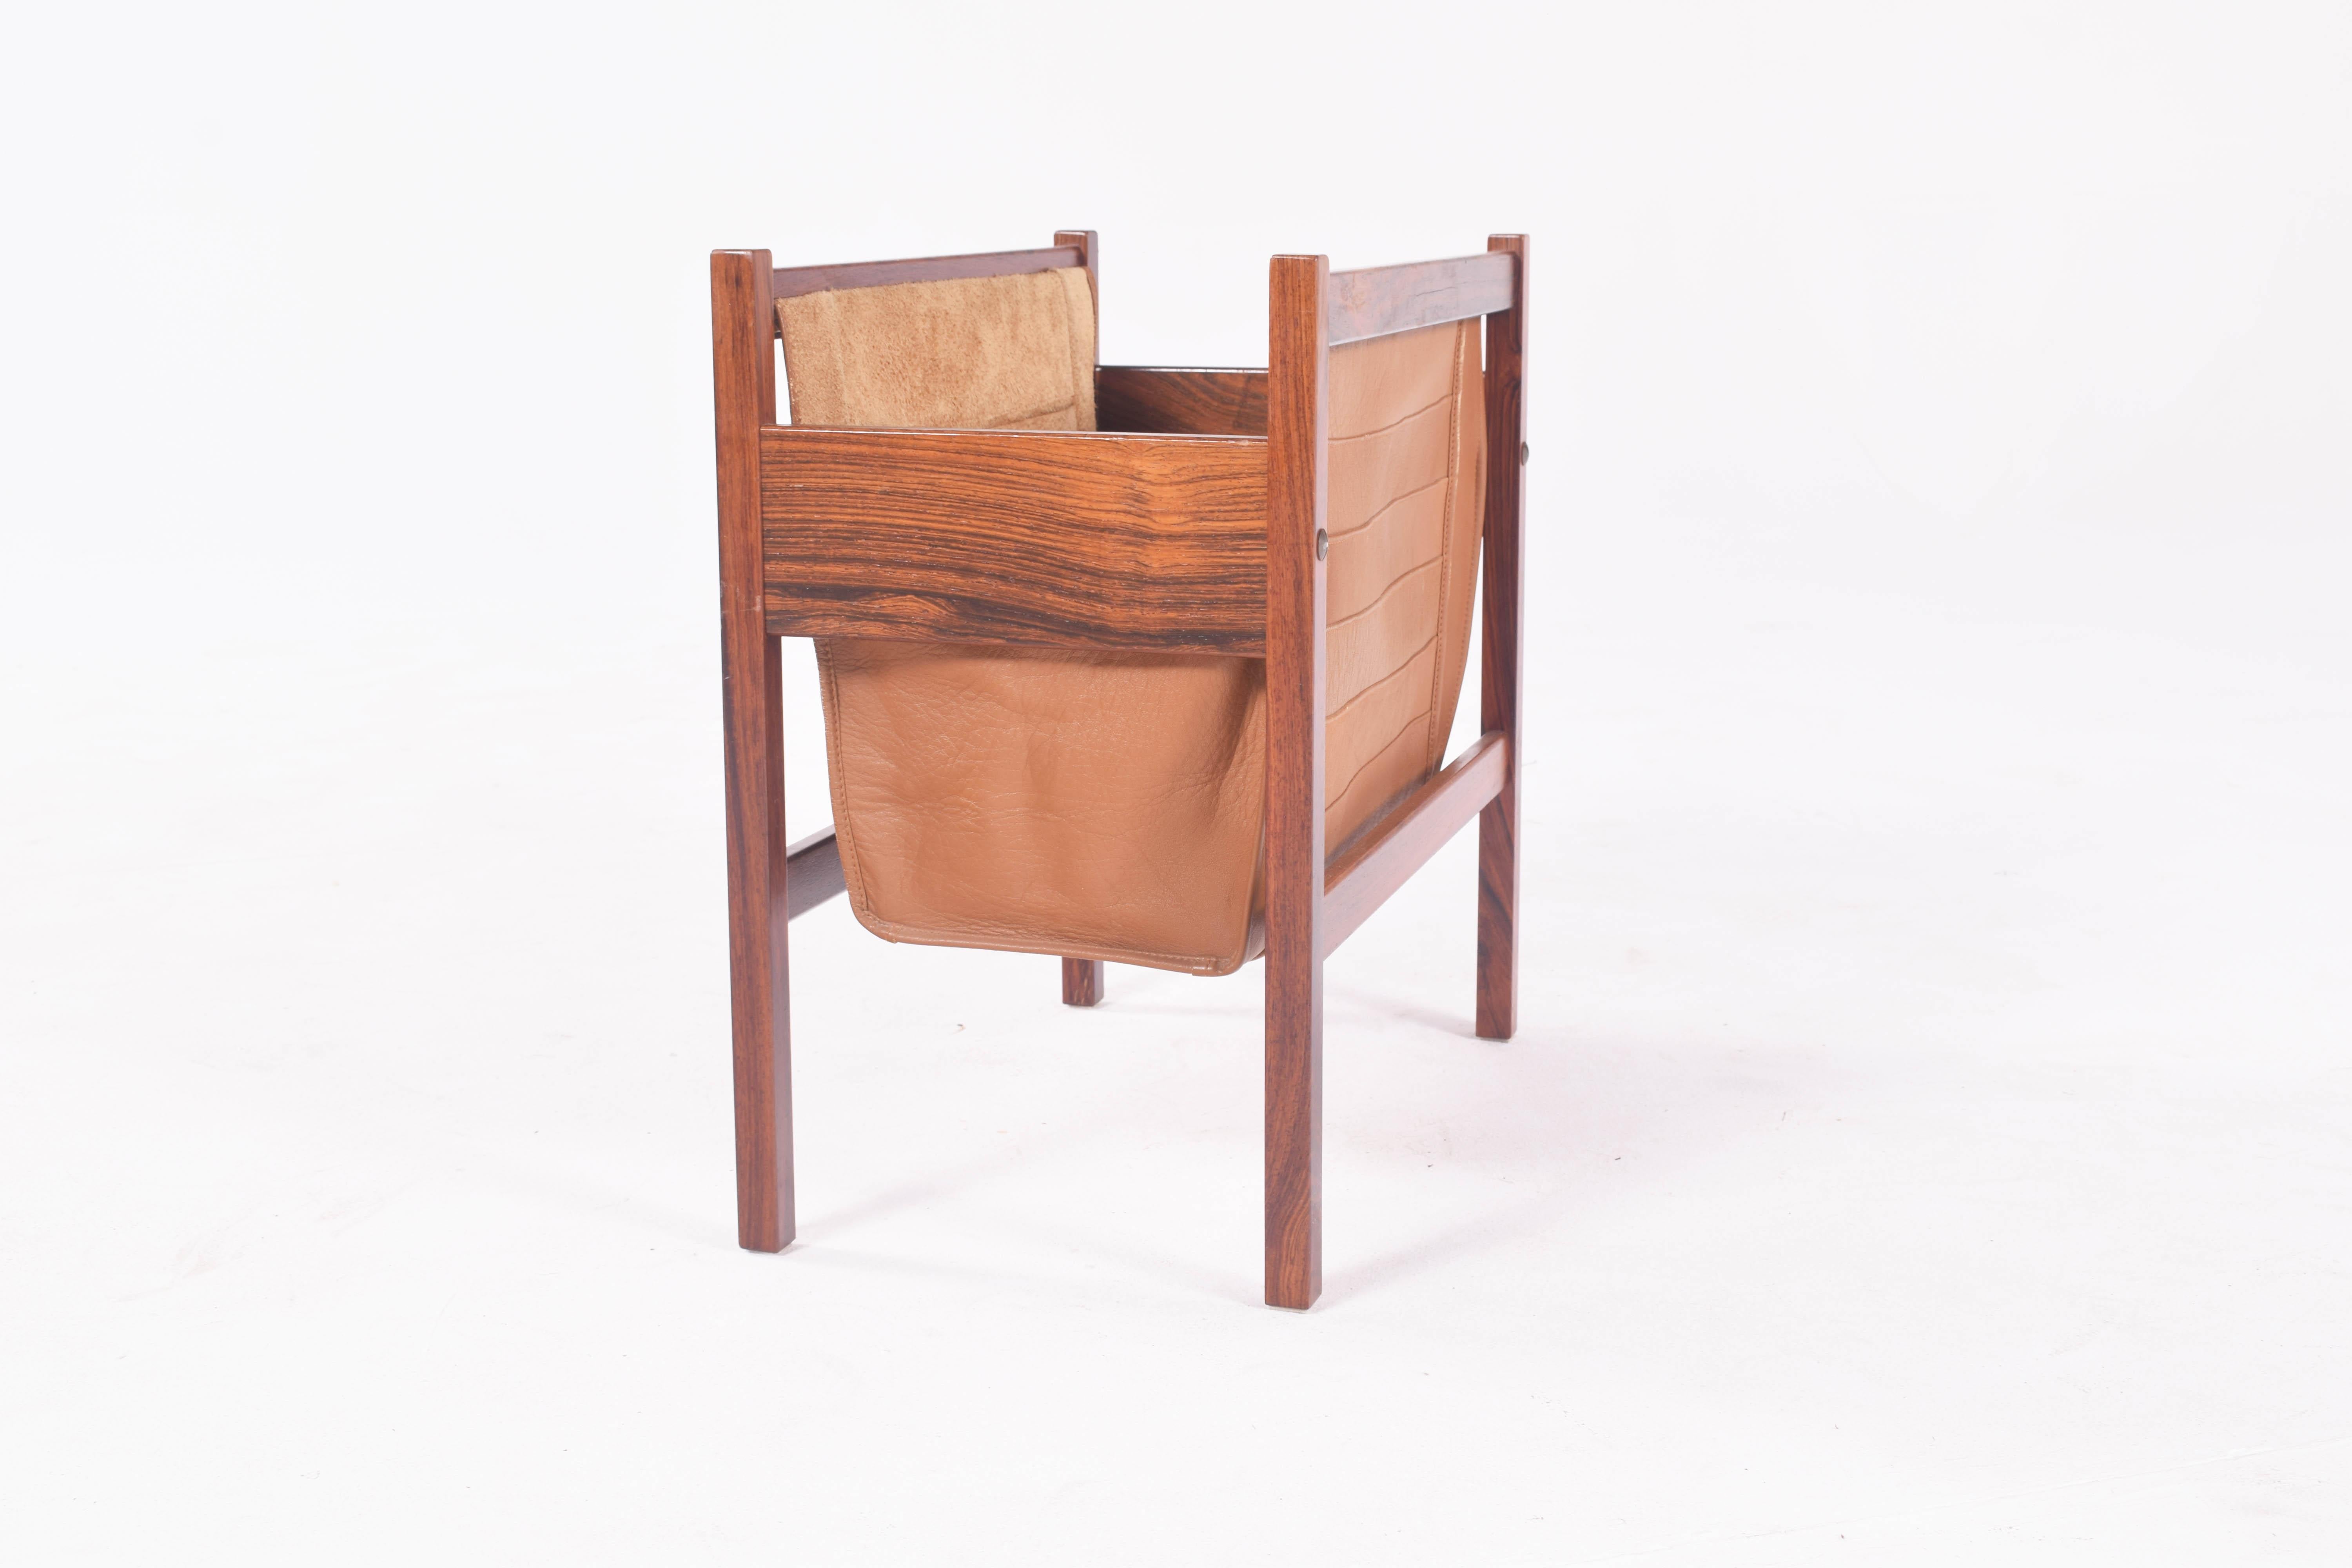 Modern magazine holder, in perfect vintage conditions. Elegant leather application with beautiful rosewood grain. Contains a rosewood divider for the magazines on the interior.